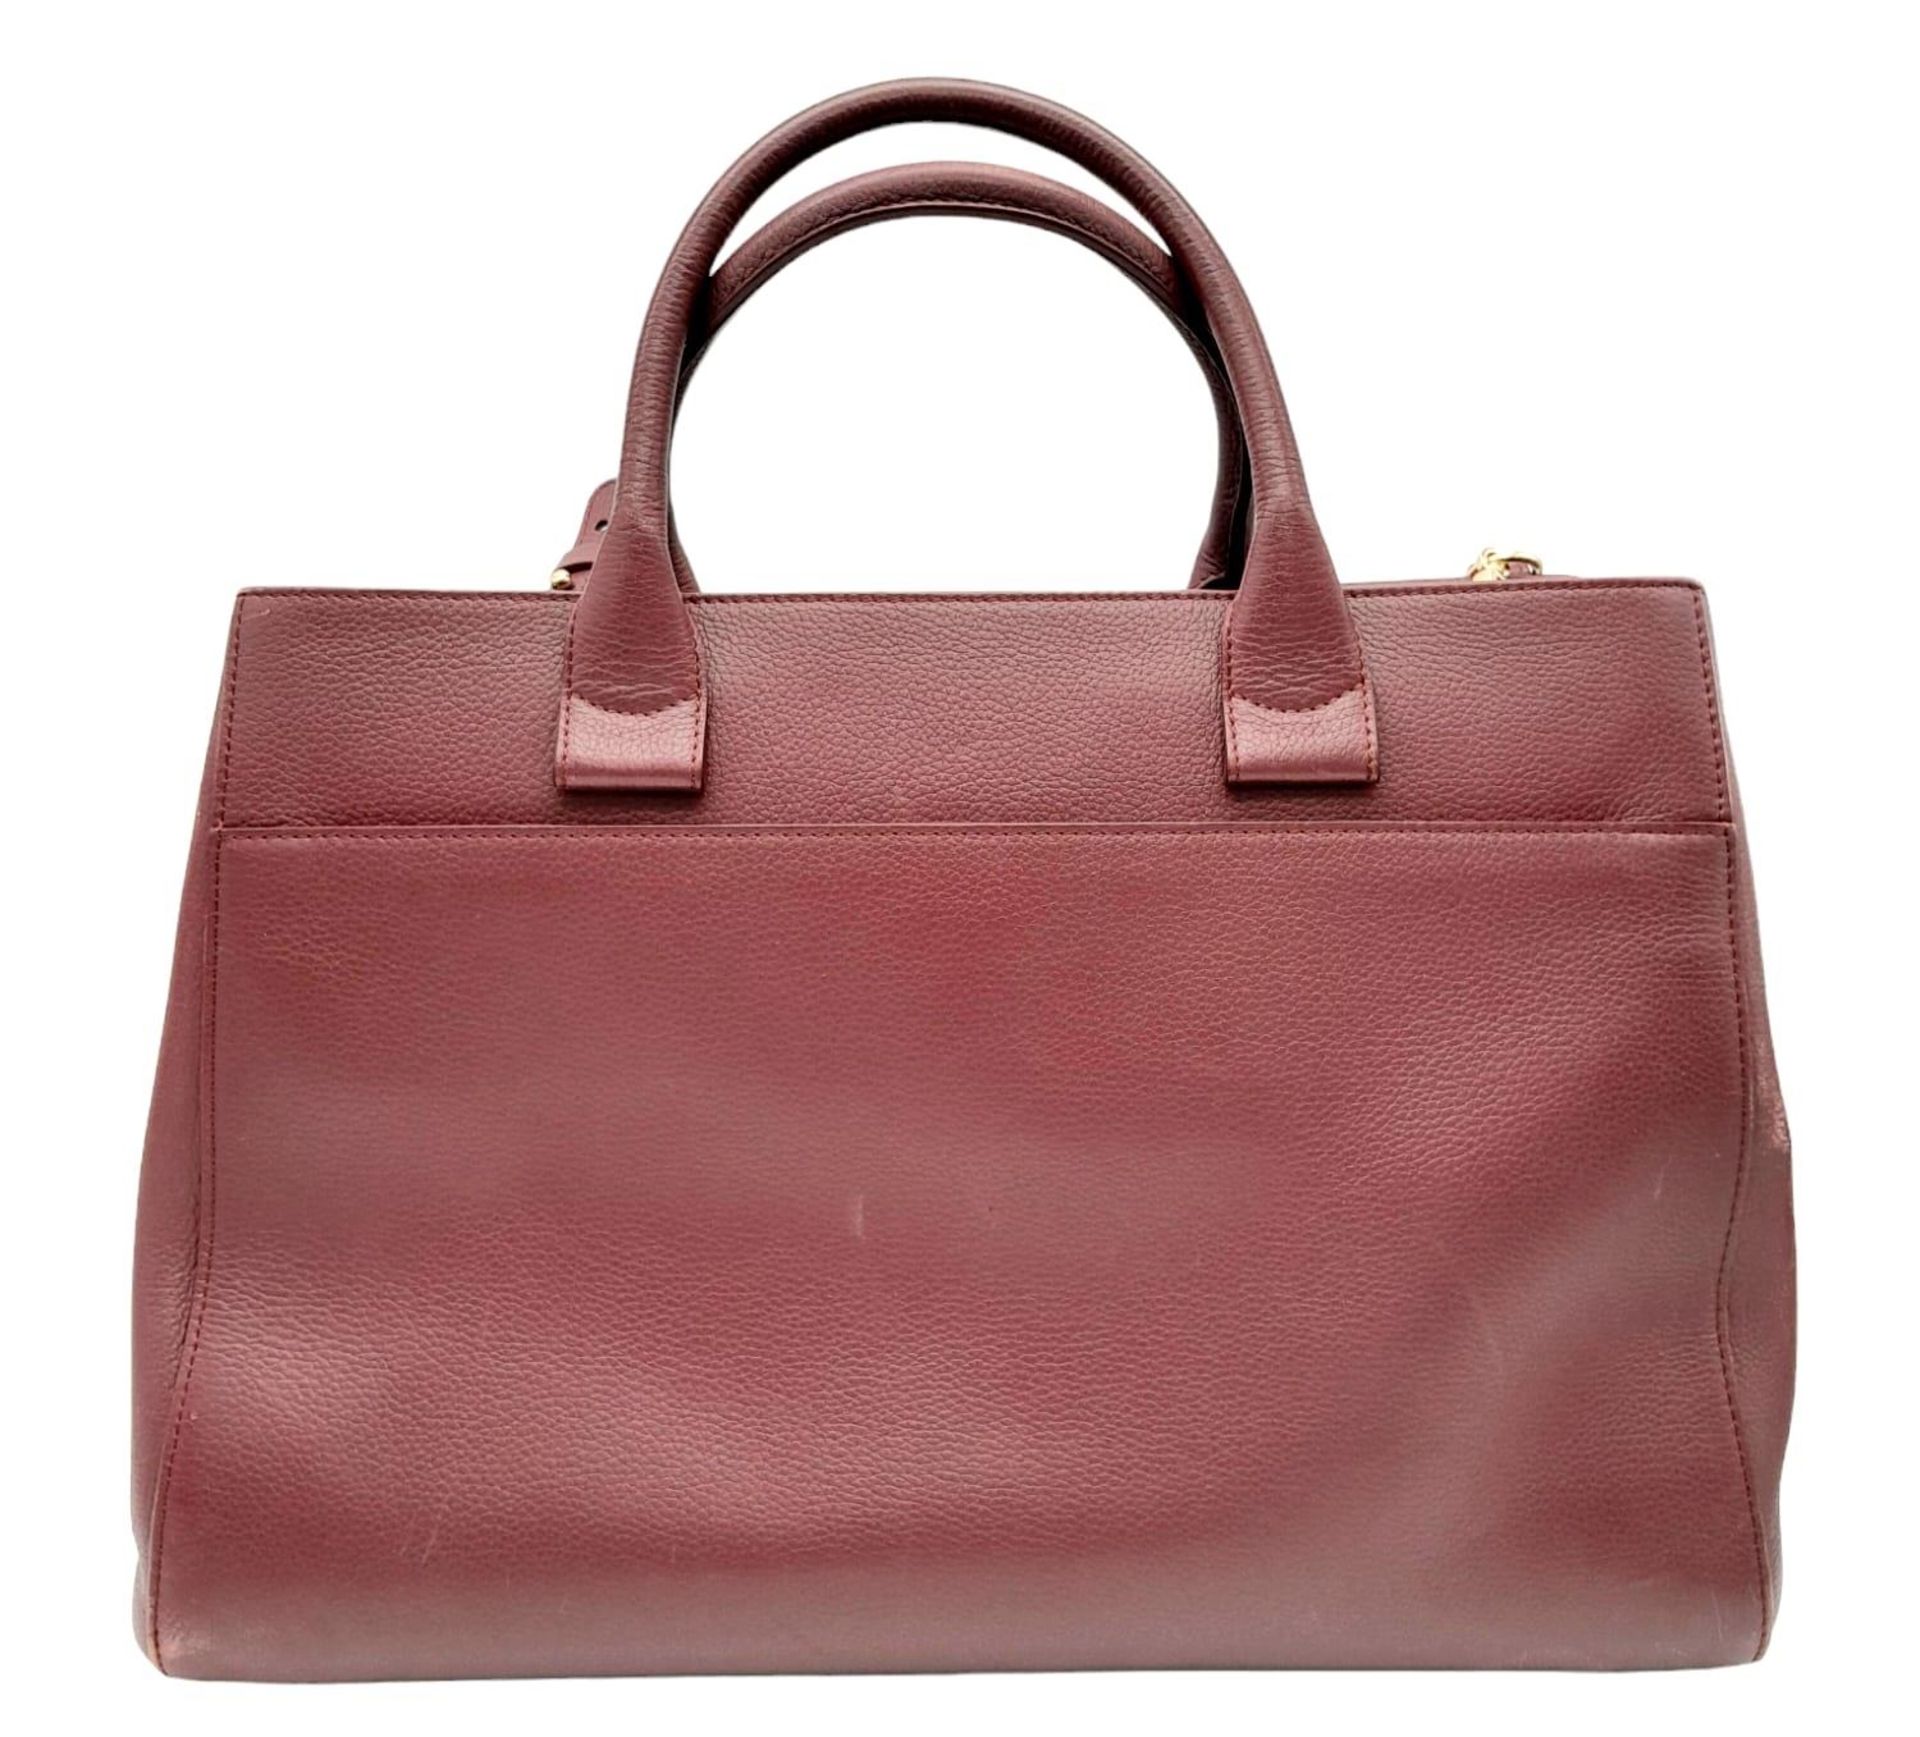 A Chanel Neo Executive Leather Tote Bag. Burgundy leather exterior with gold tone hardware and two - Image 3 of 11